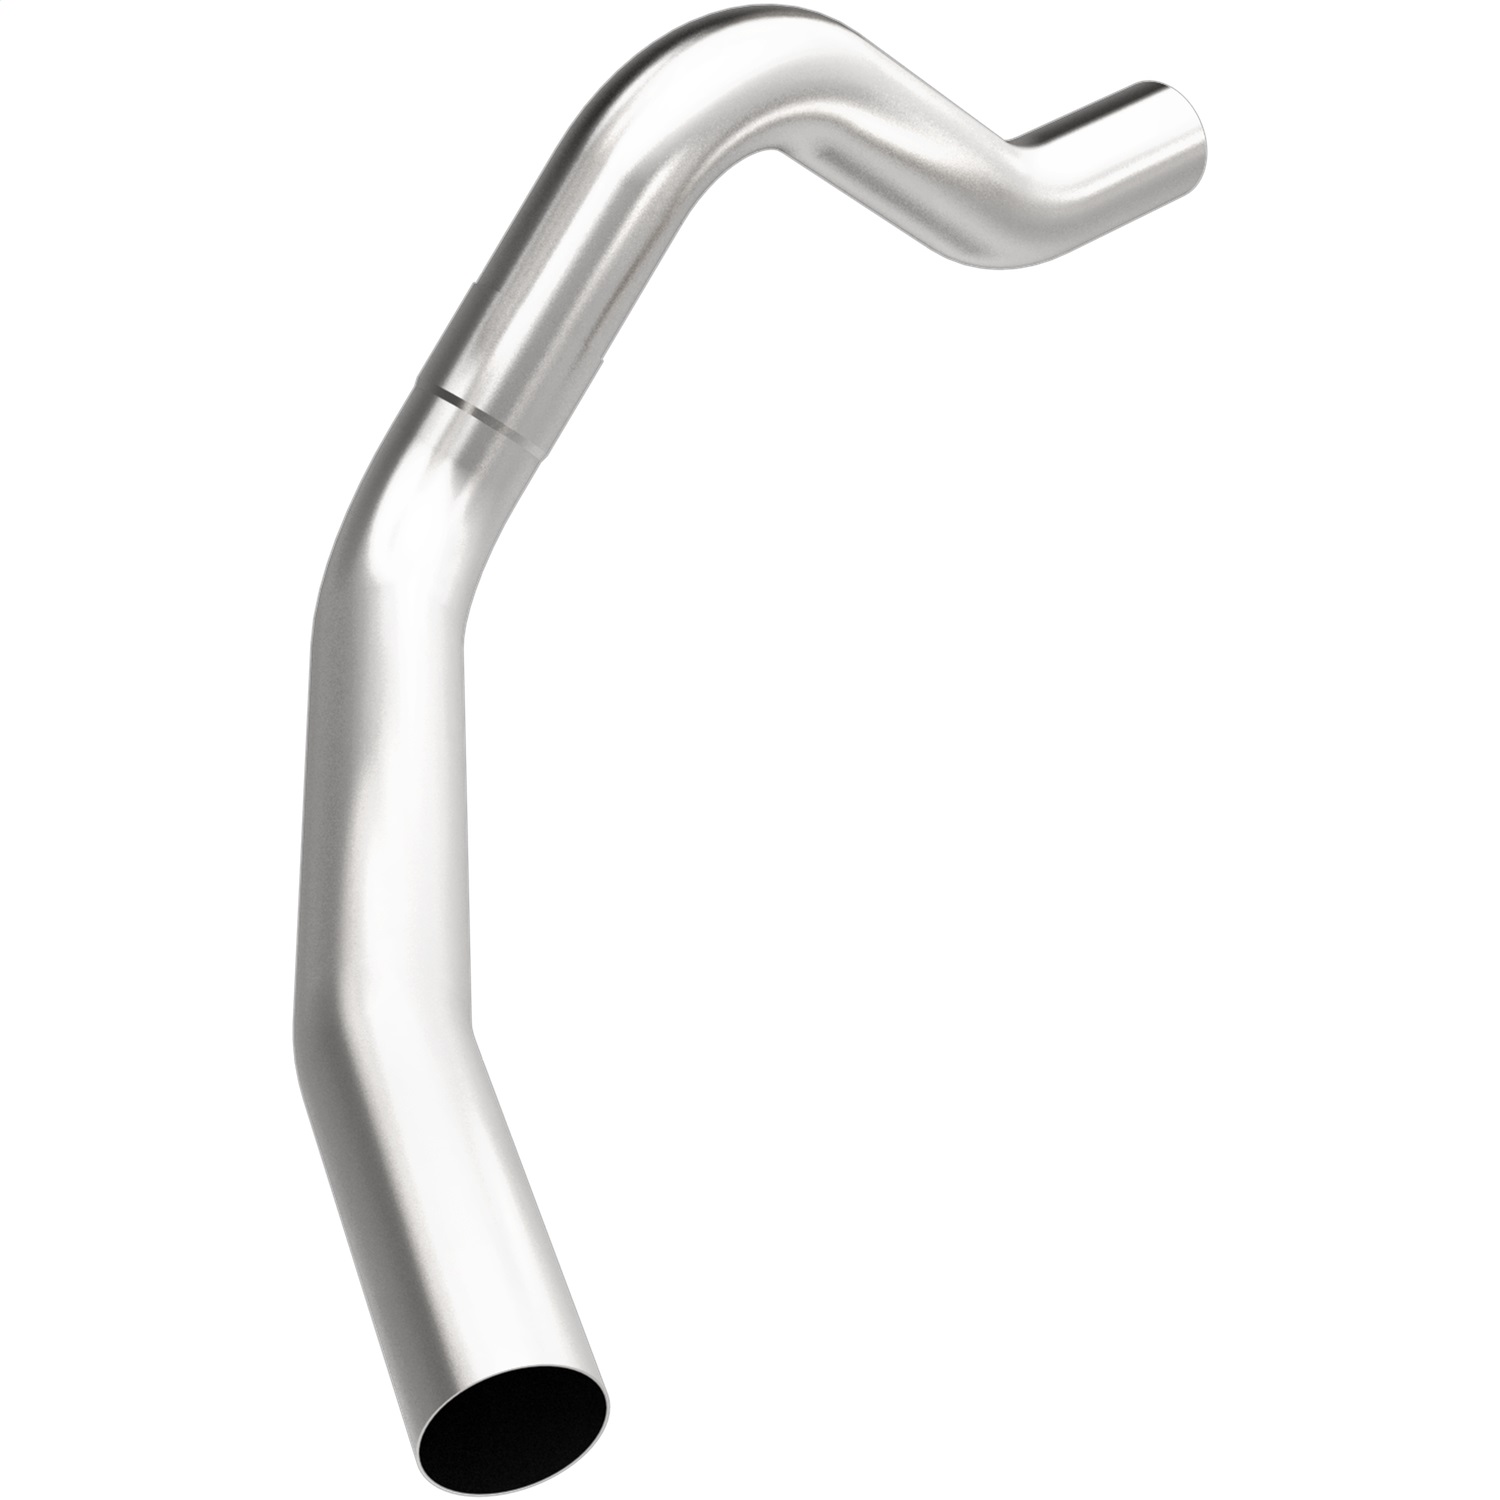 Magnaflow Performance Exhaust Magnaflow Performance Exhaust 15455 Stainless Steel Tail Pipe